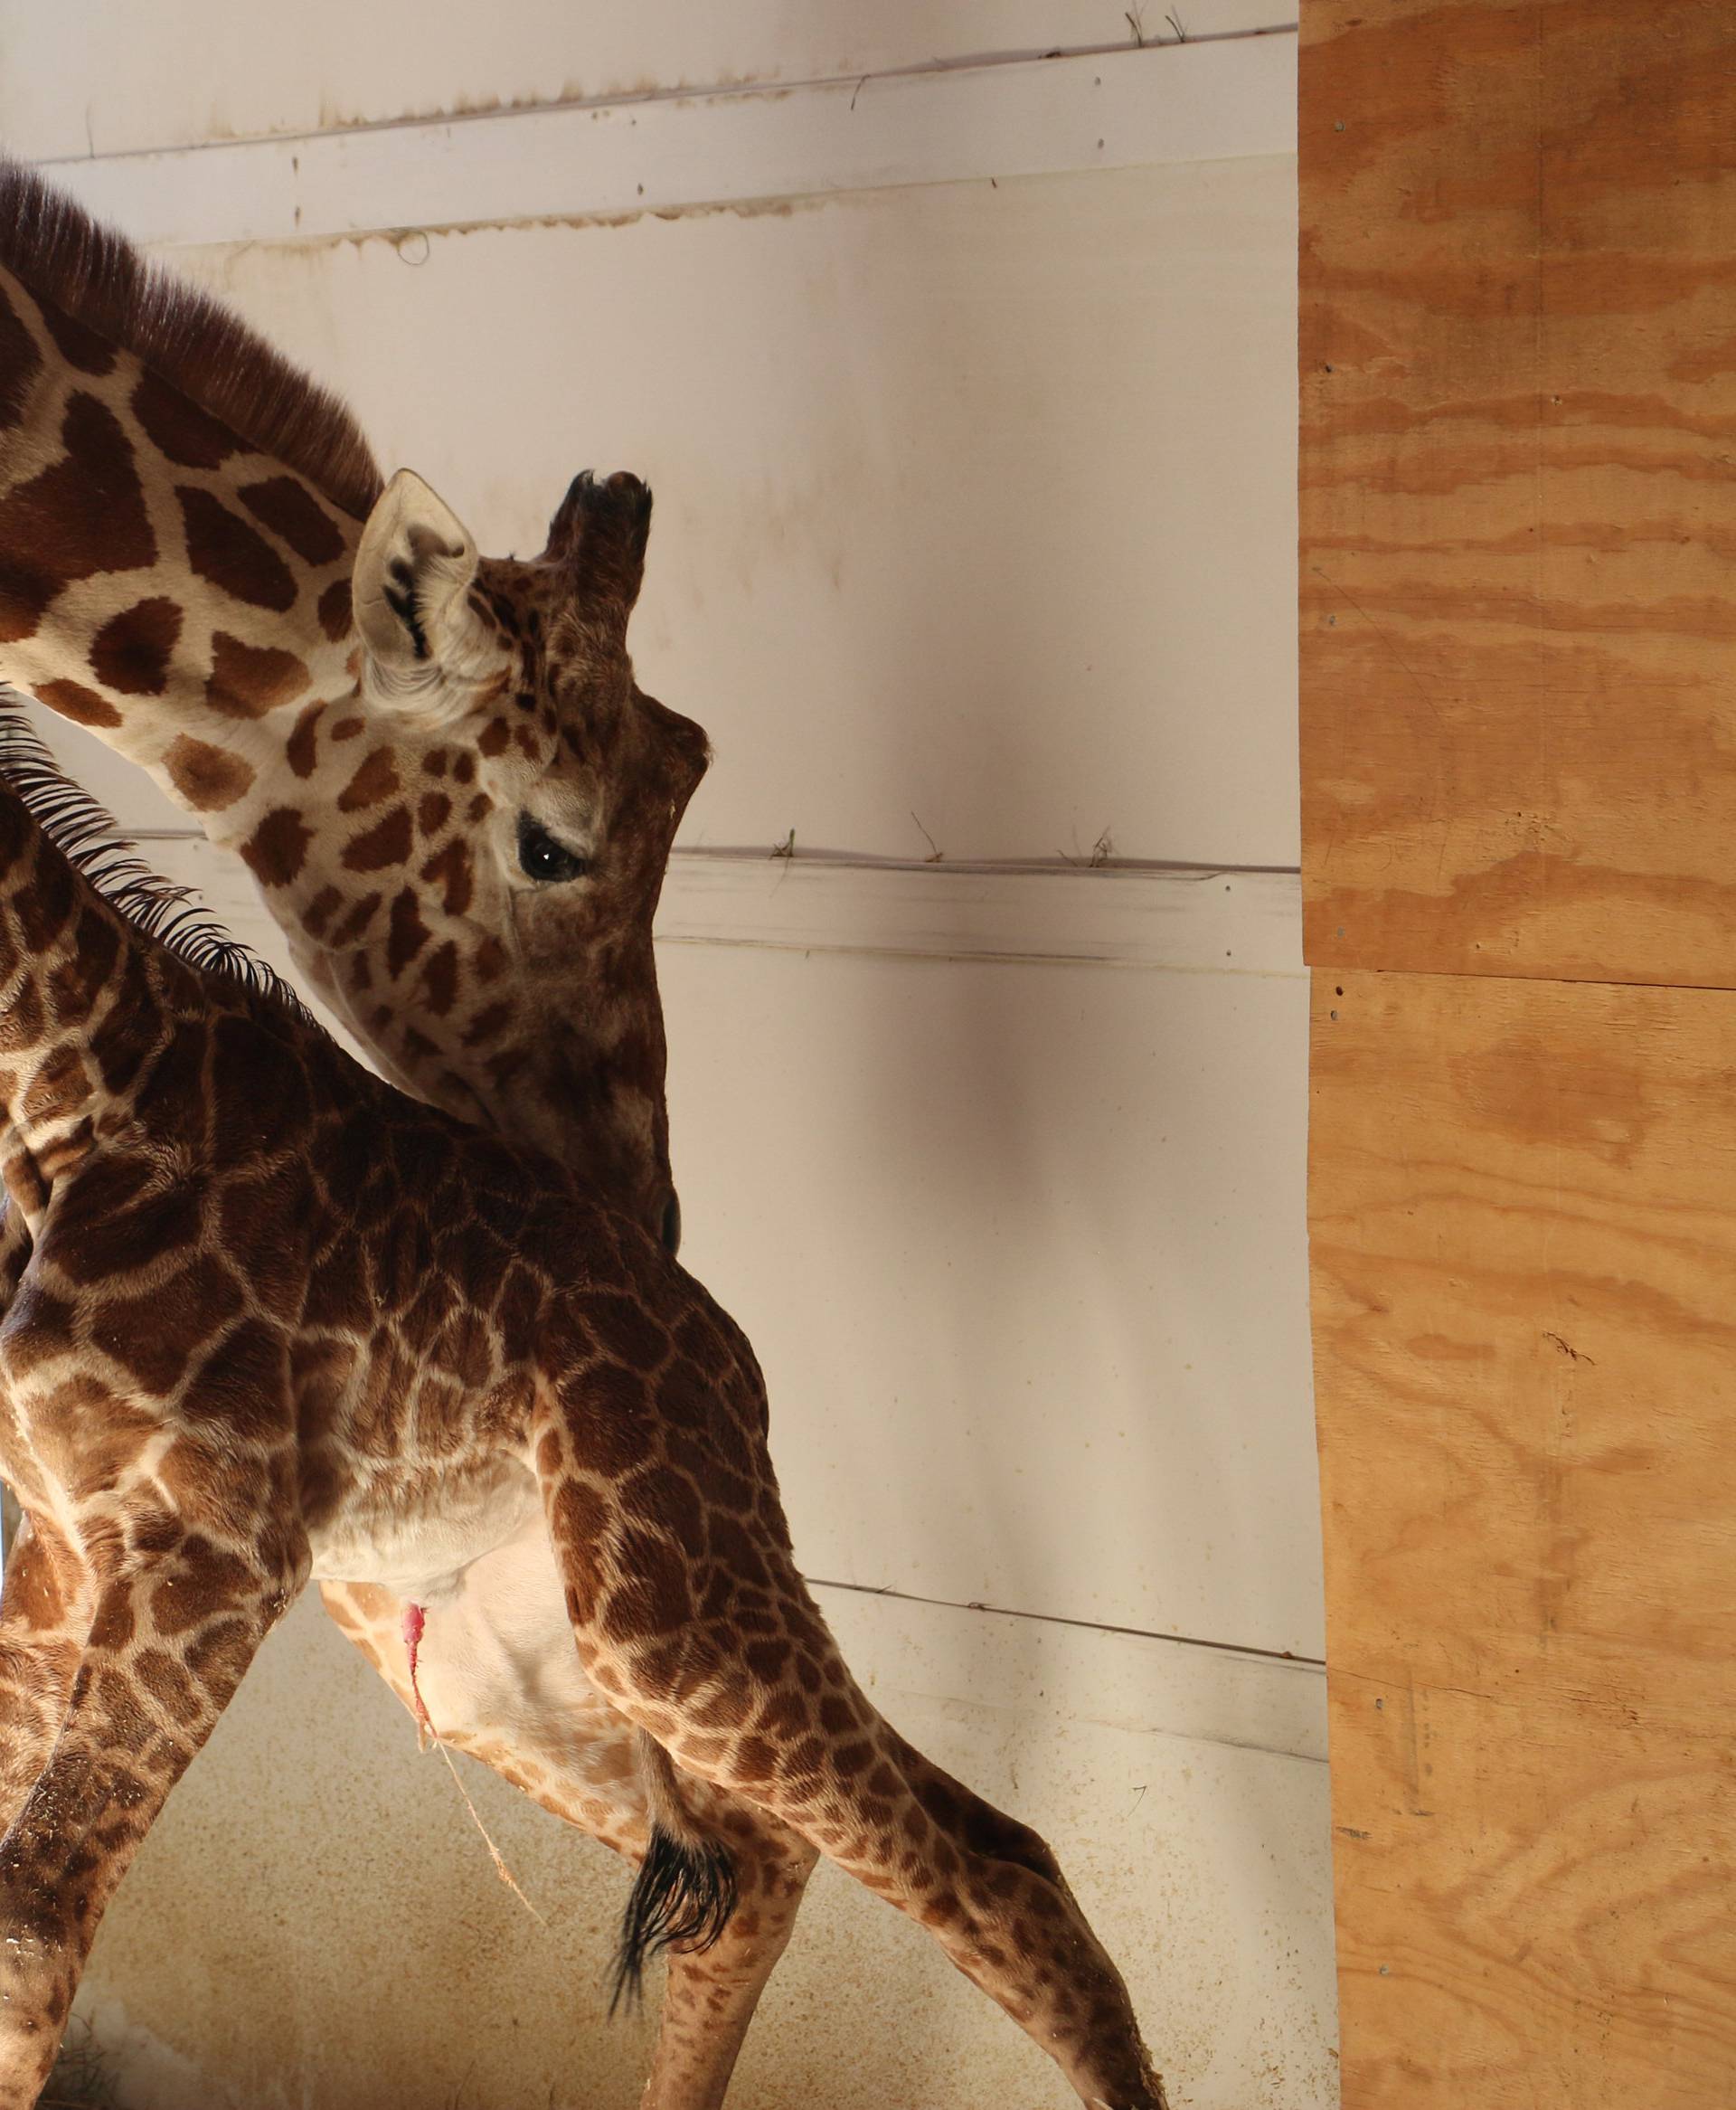 April helps her newly born unamed baby giraffe stand at the Animal Adventure Park, in Harpursville